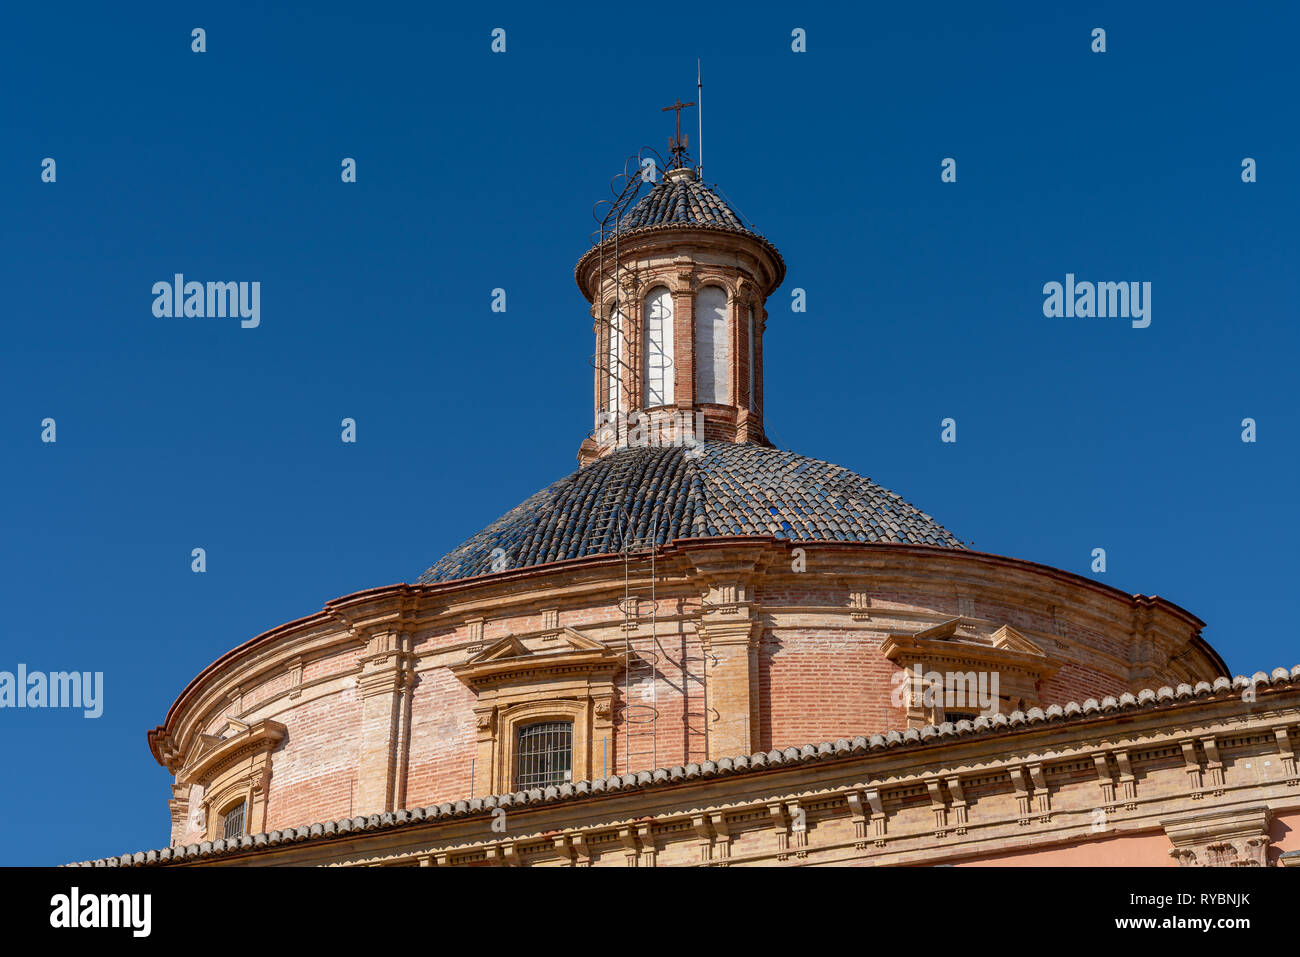 VALENCIA, SPAIN - FEBRUARY 25 : Dome of the Cathedral of Our Lady of the Forsaken in  Valencia Spain on February 25, 2019 Stock Photo